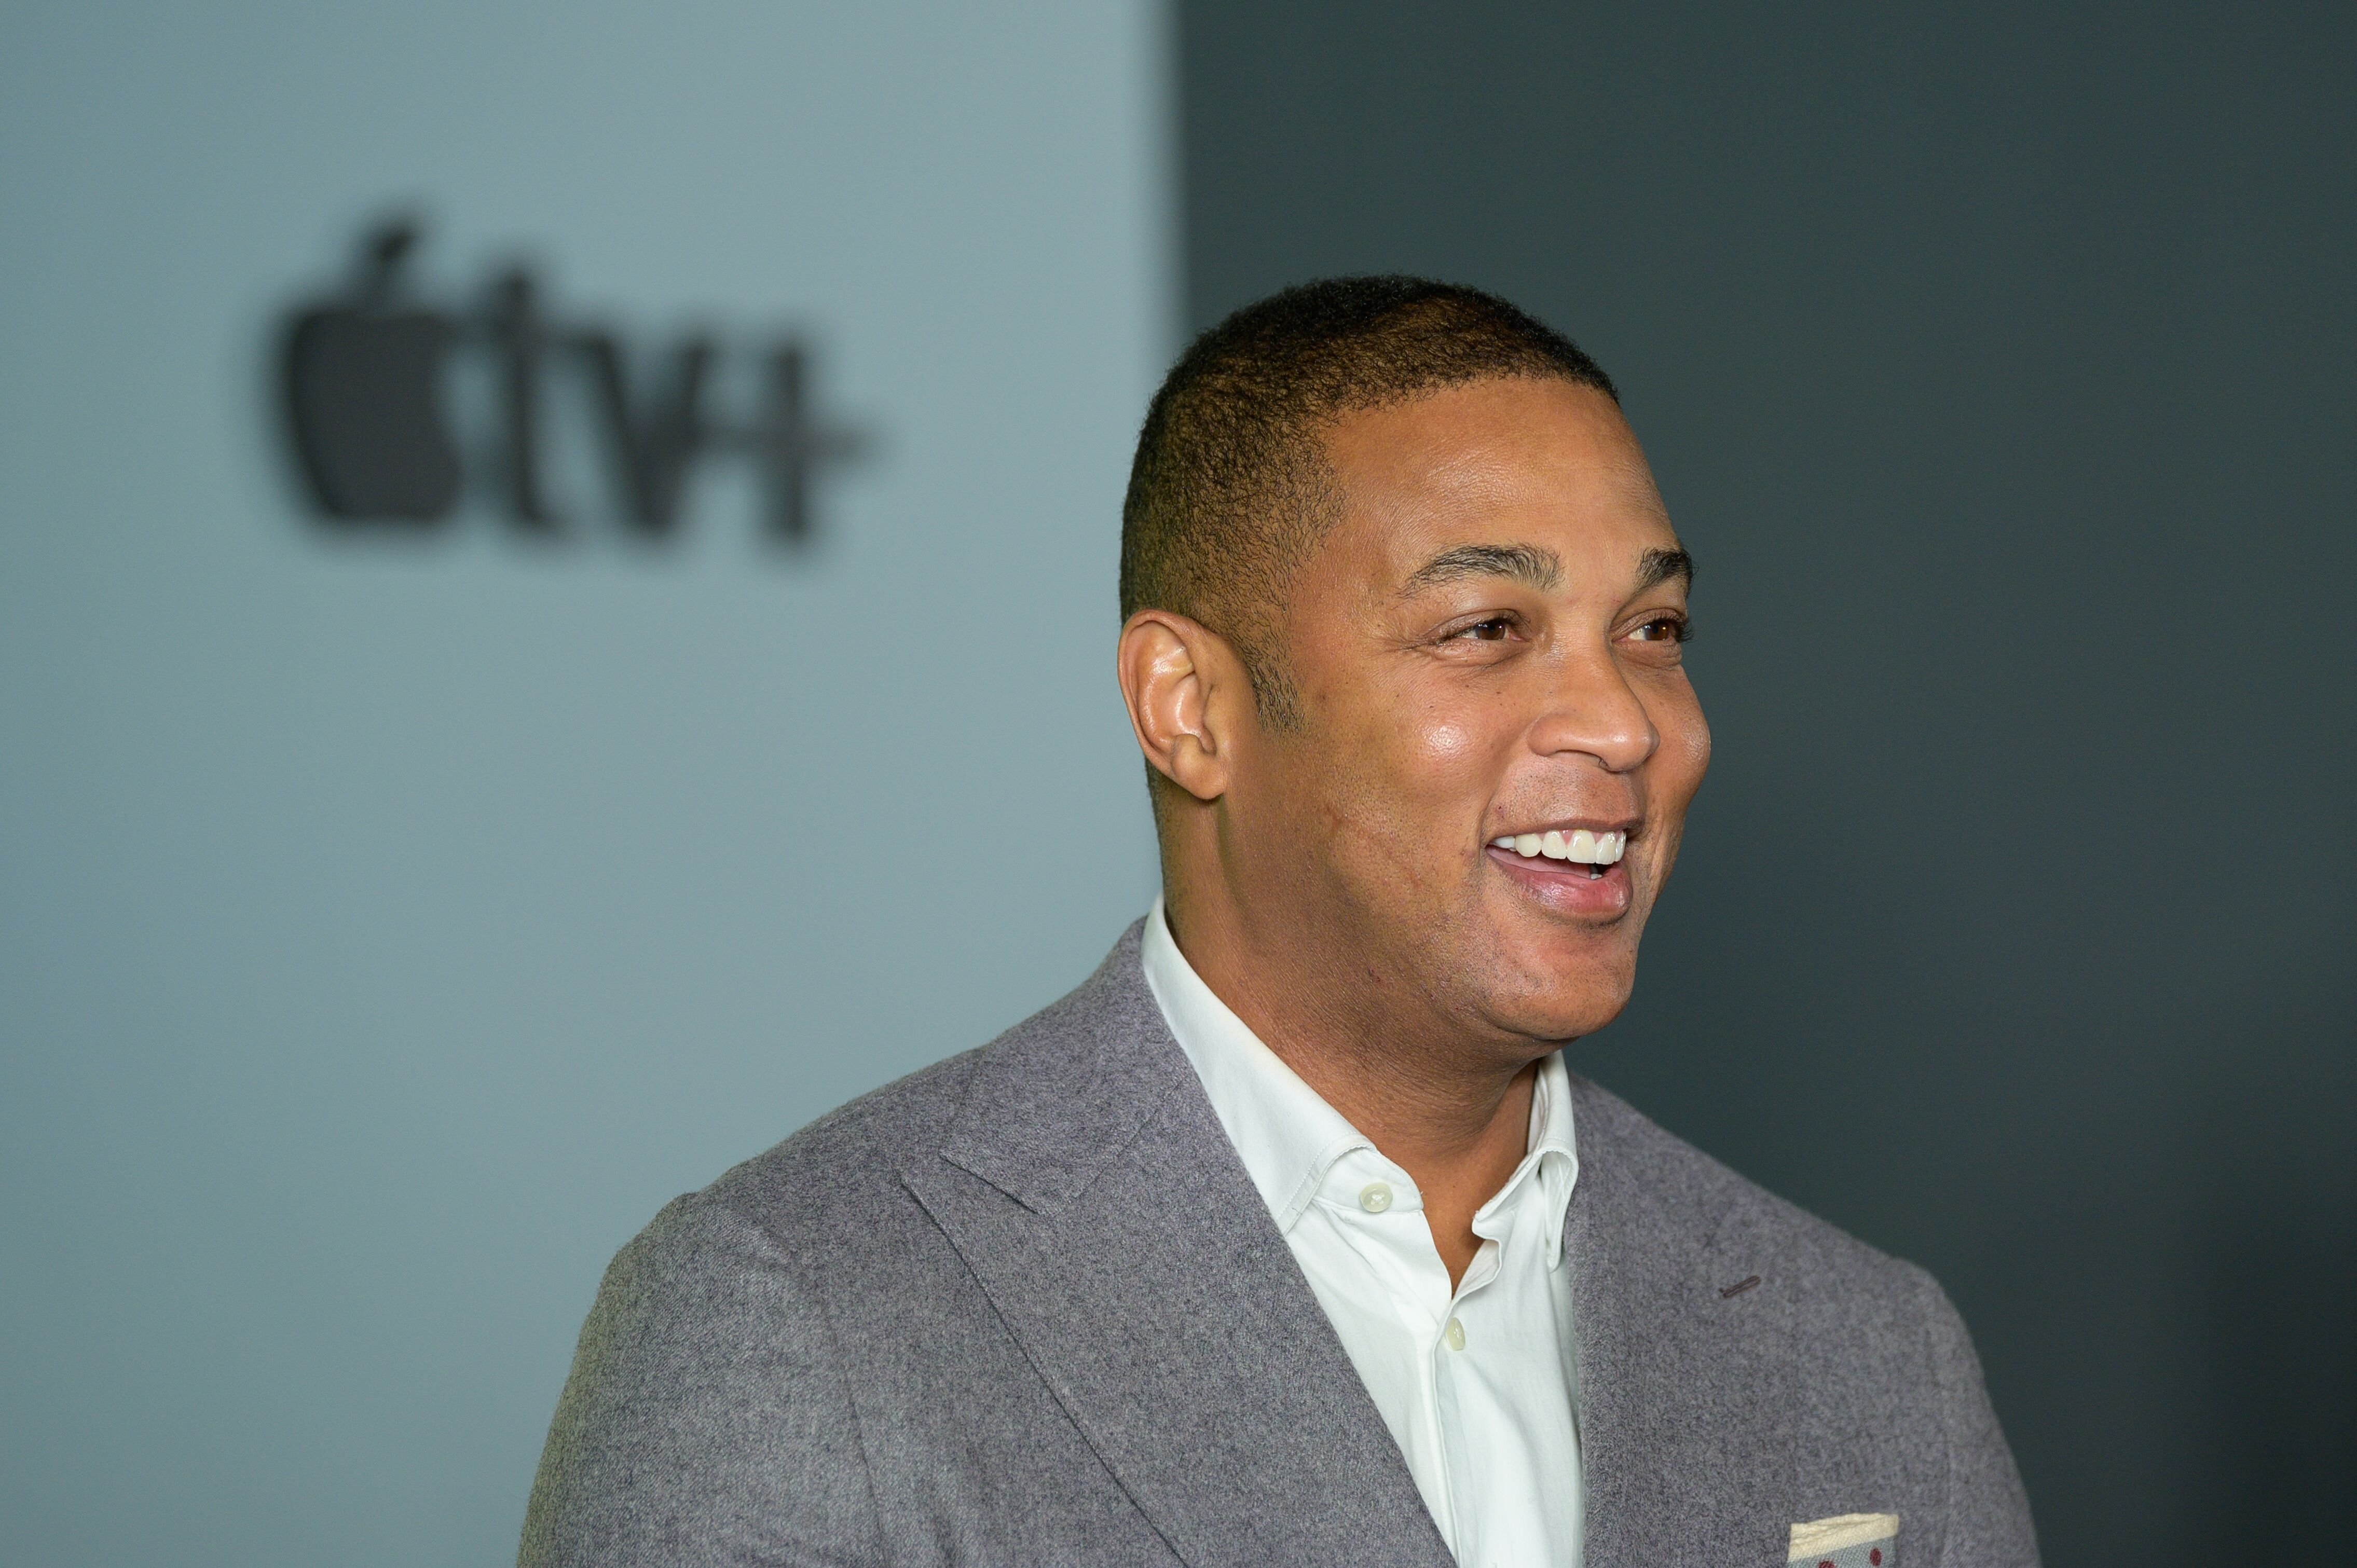 Don Lemon at Apple TV+'s "The Morning Show" world premiere in October 2019. | Photo: Getty Images